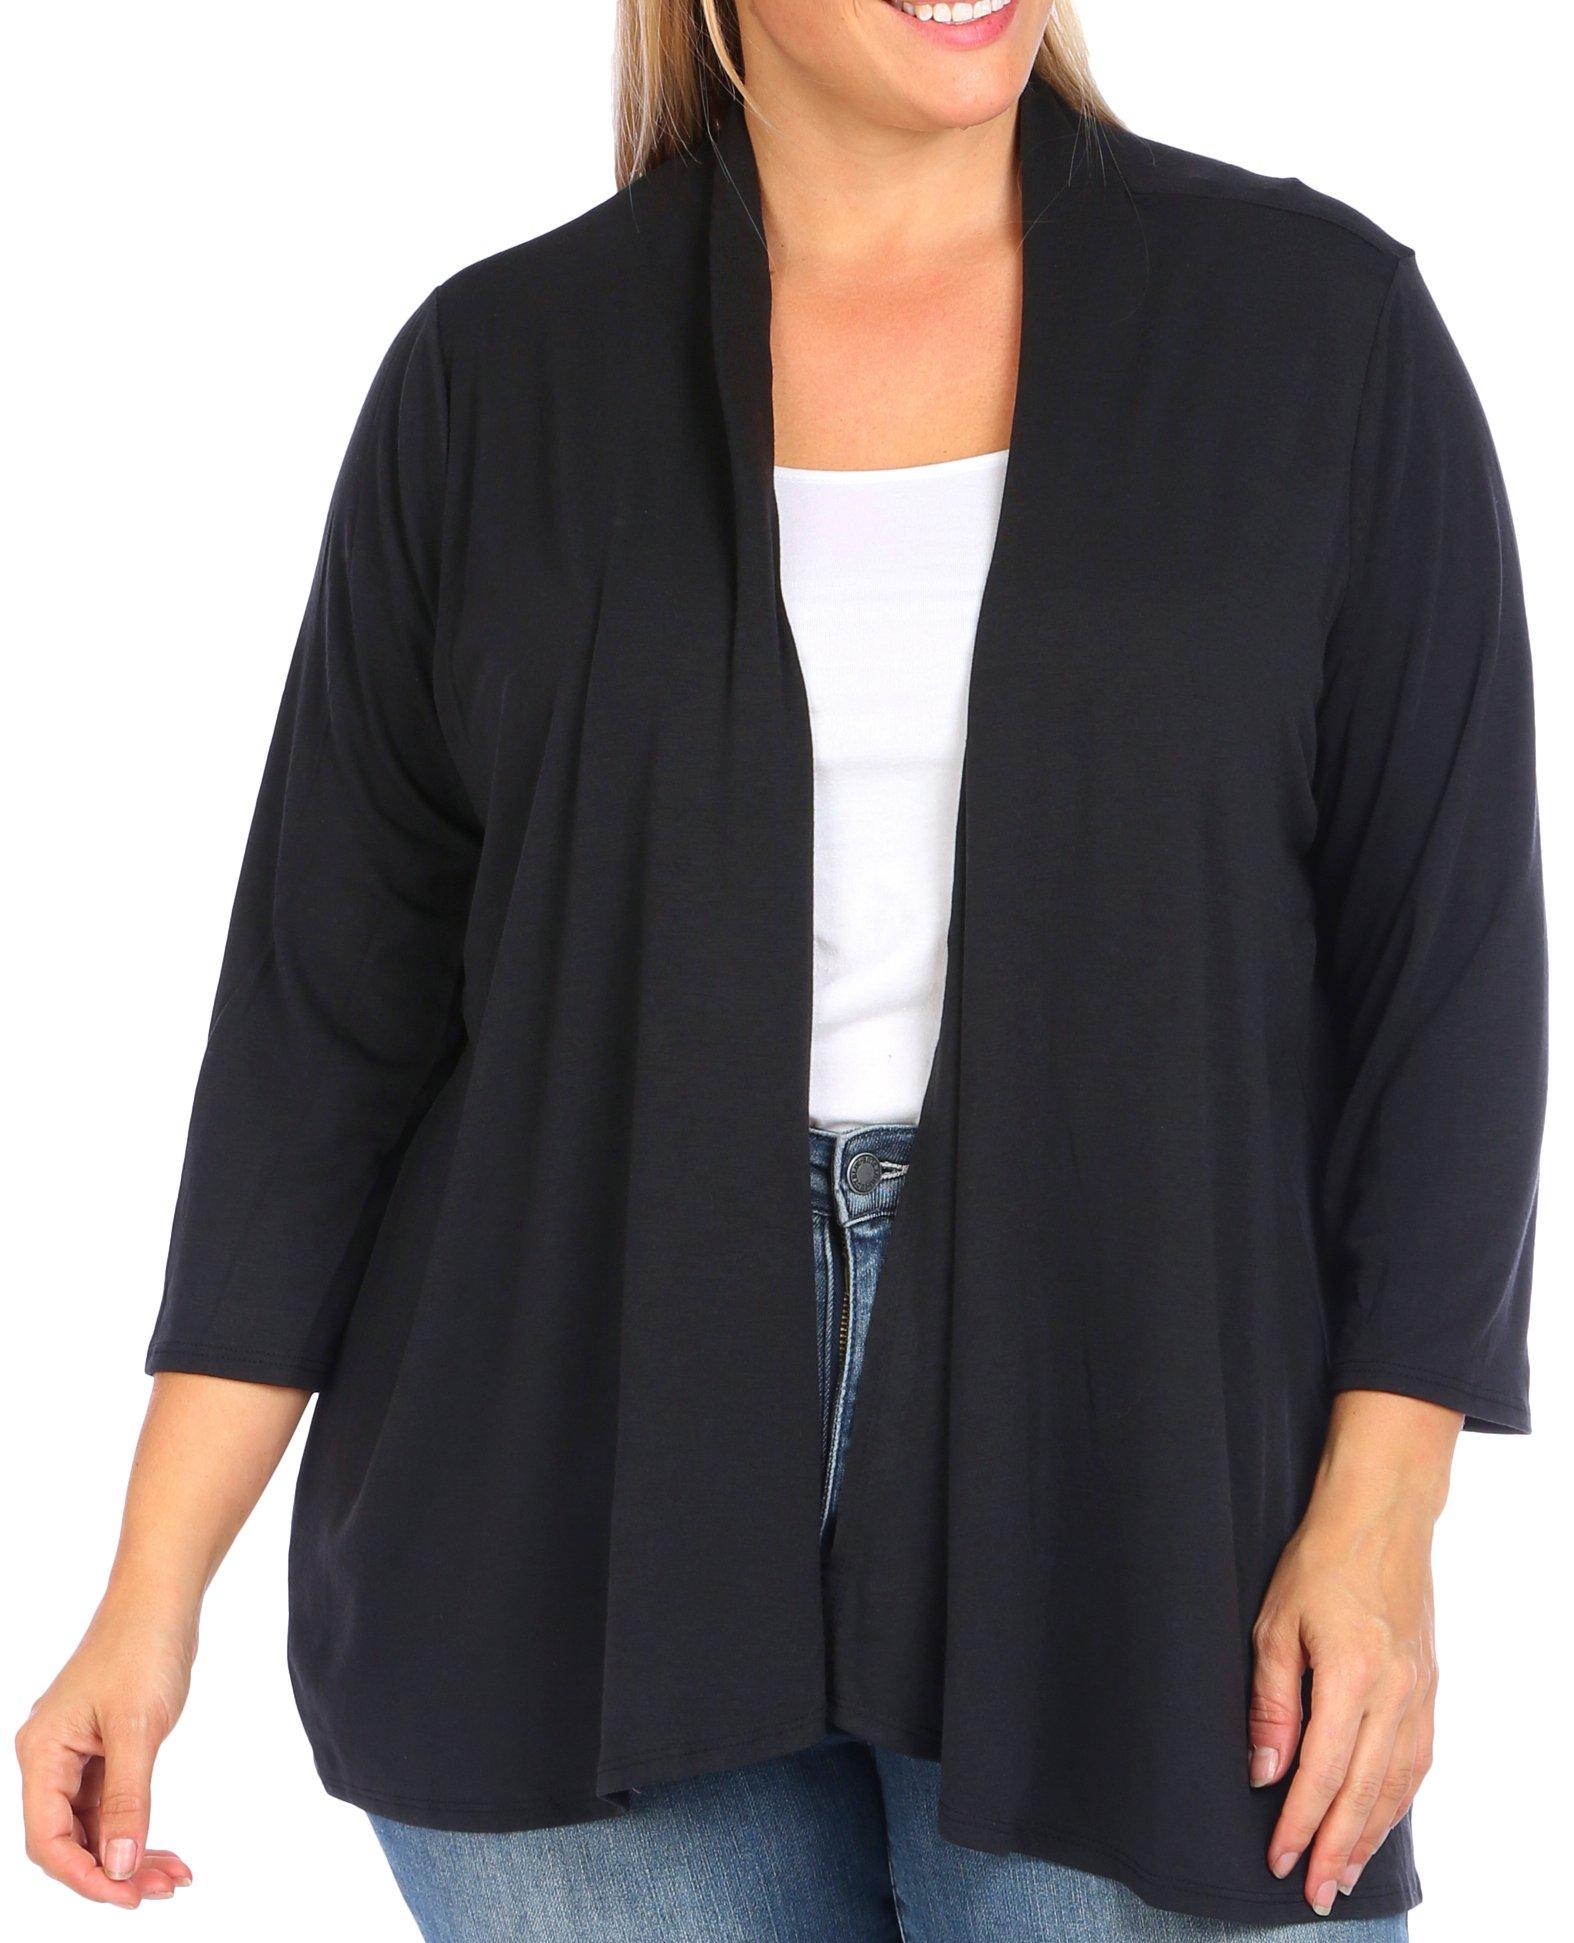 Notations Plus Size 3/4 Sleeve Solid Cardigan